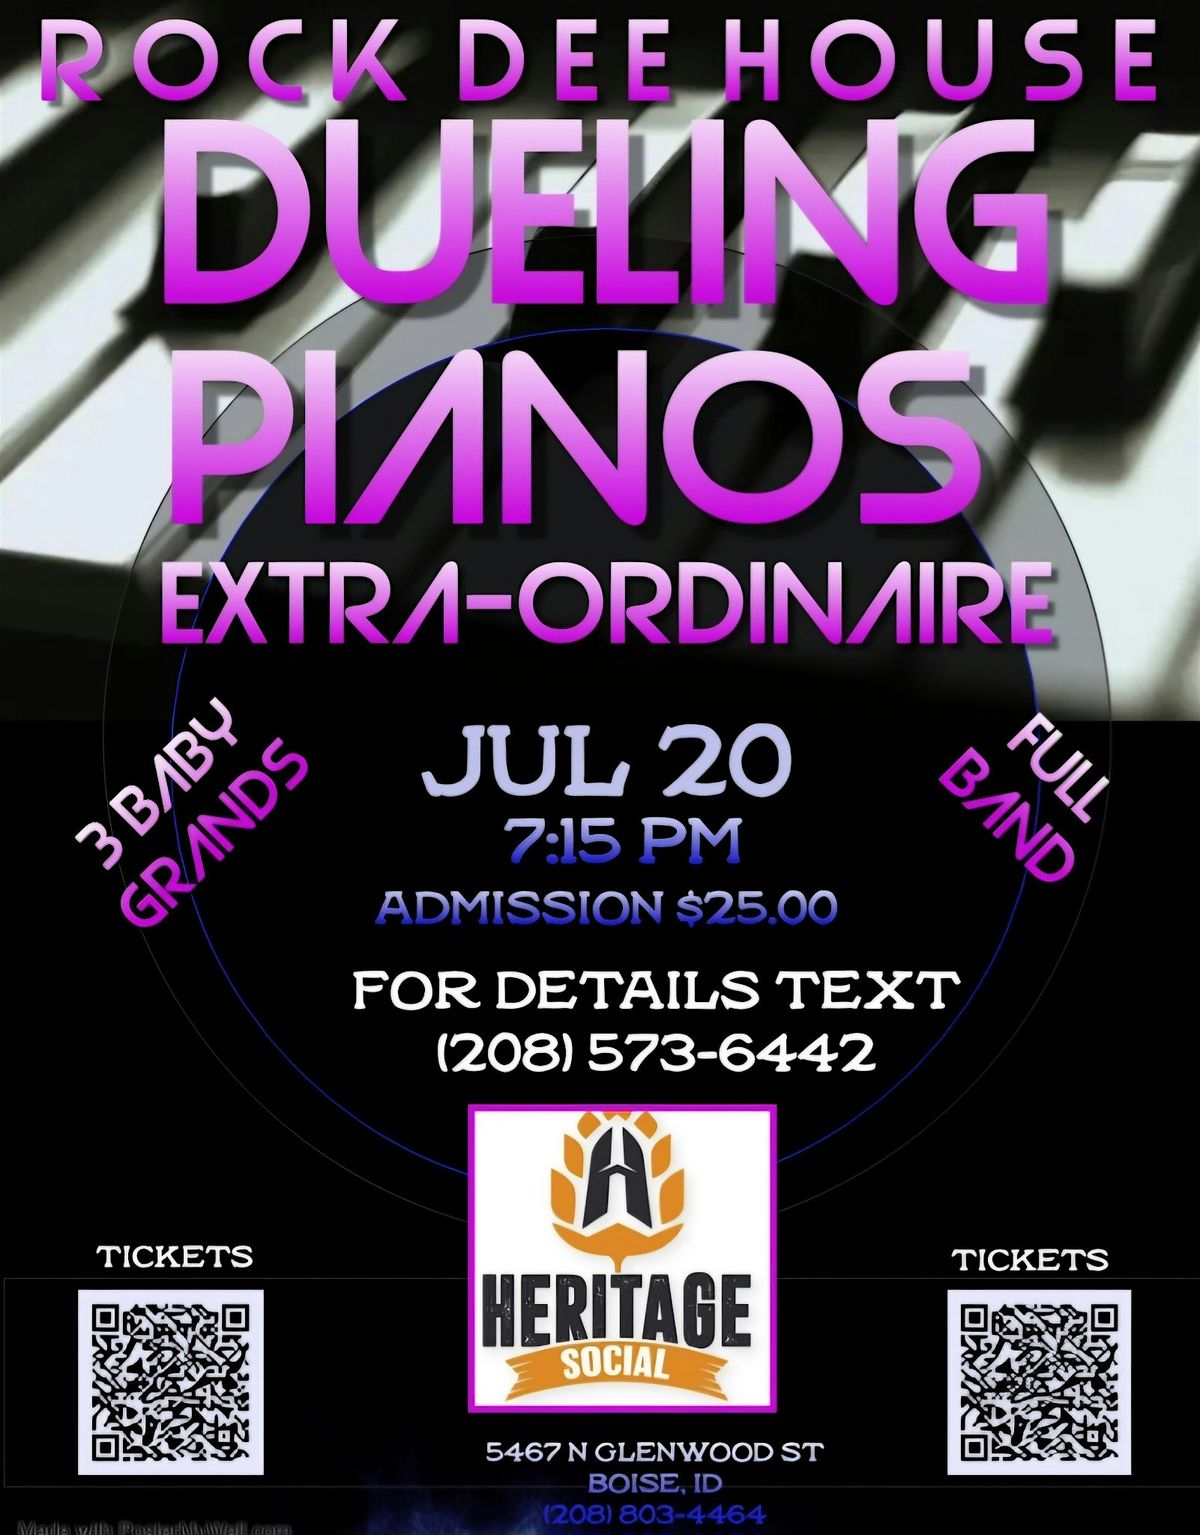 ROCK DEE HOUSE DUELING PIANOS BAND @ Heritage Social Club